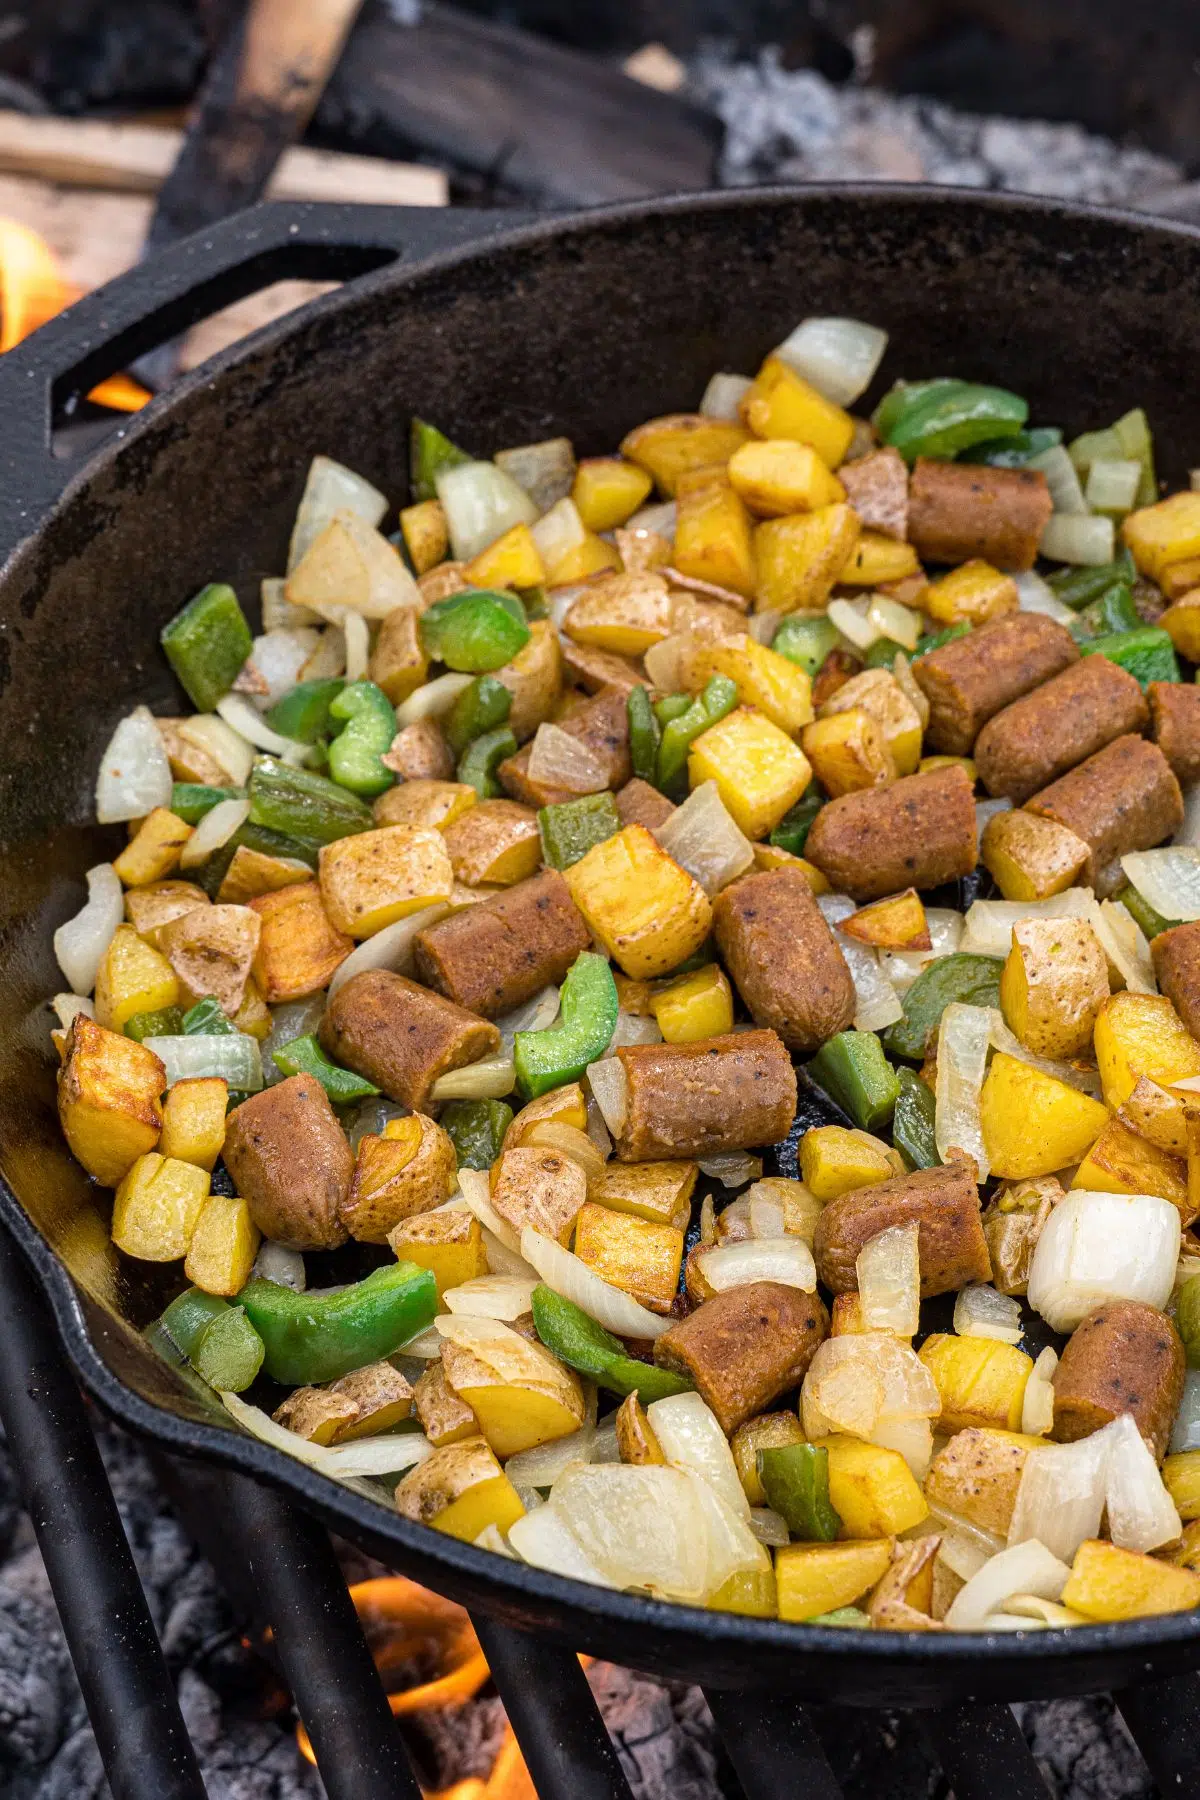 Sausage, peppers, onions, and potatoes cooking in a cast iron skillet